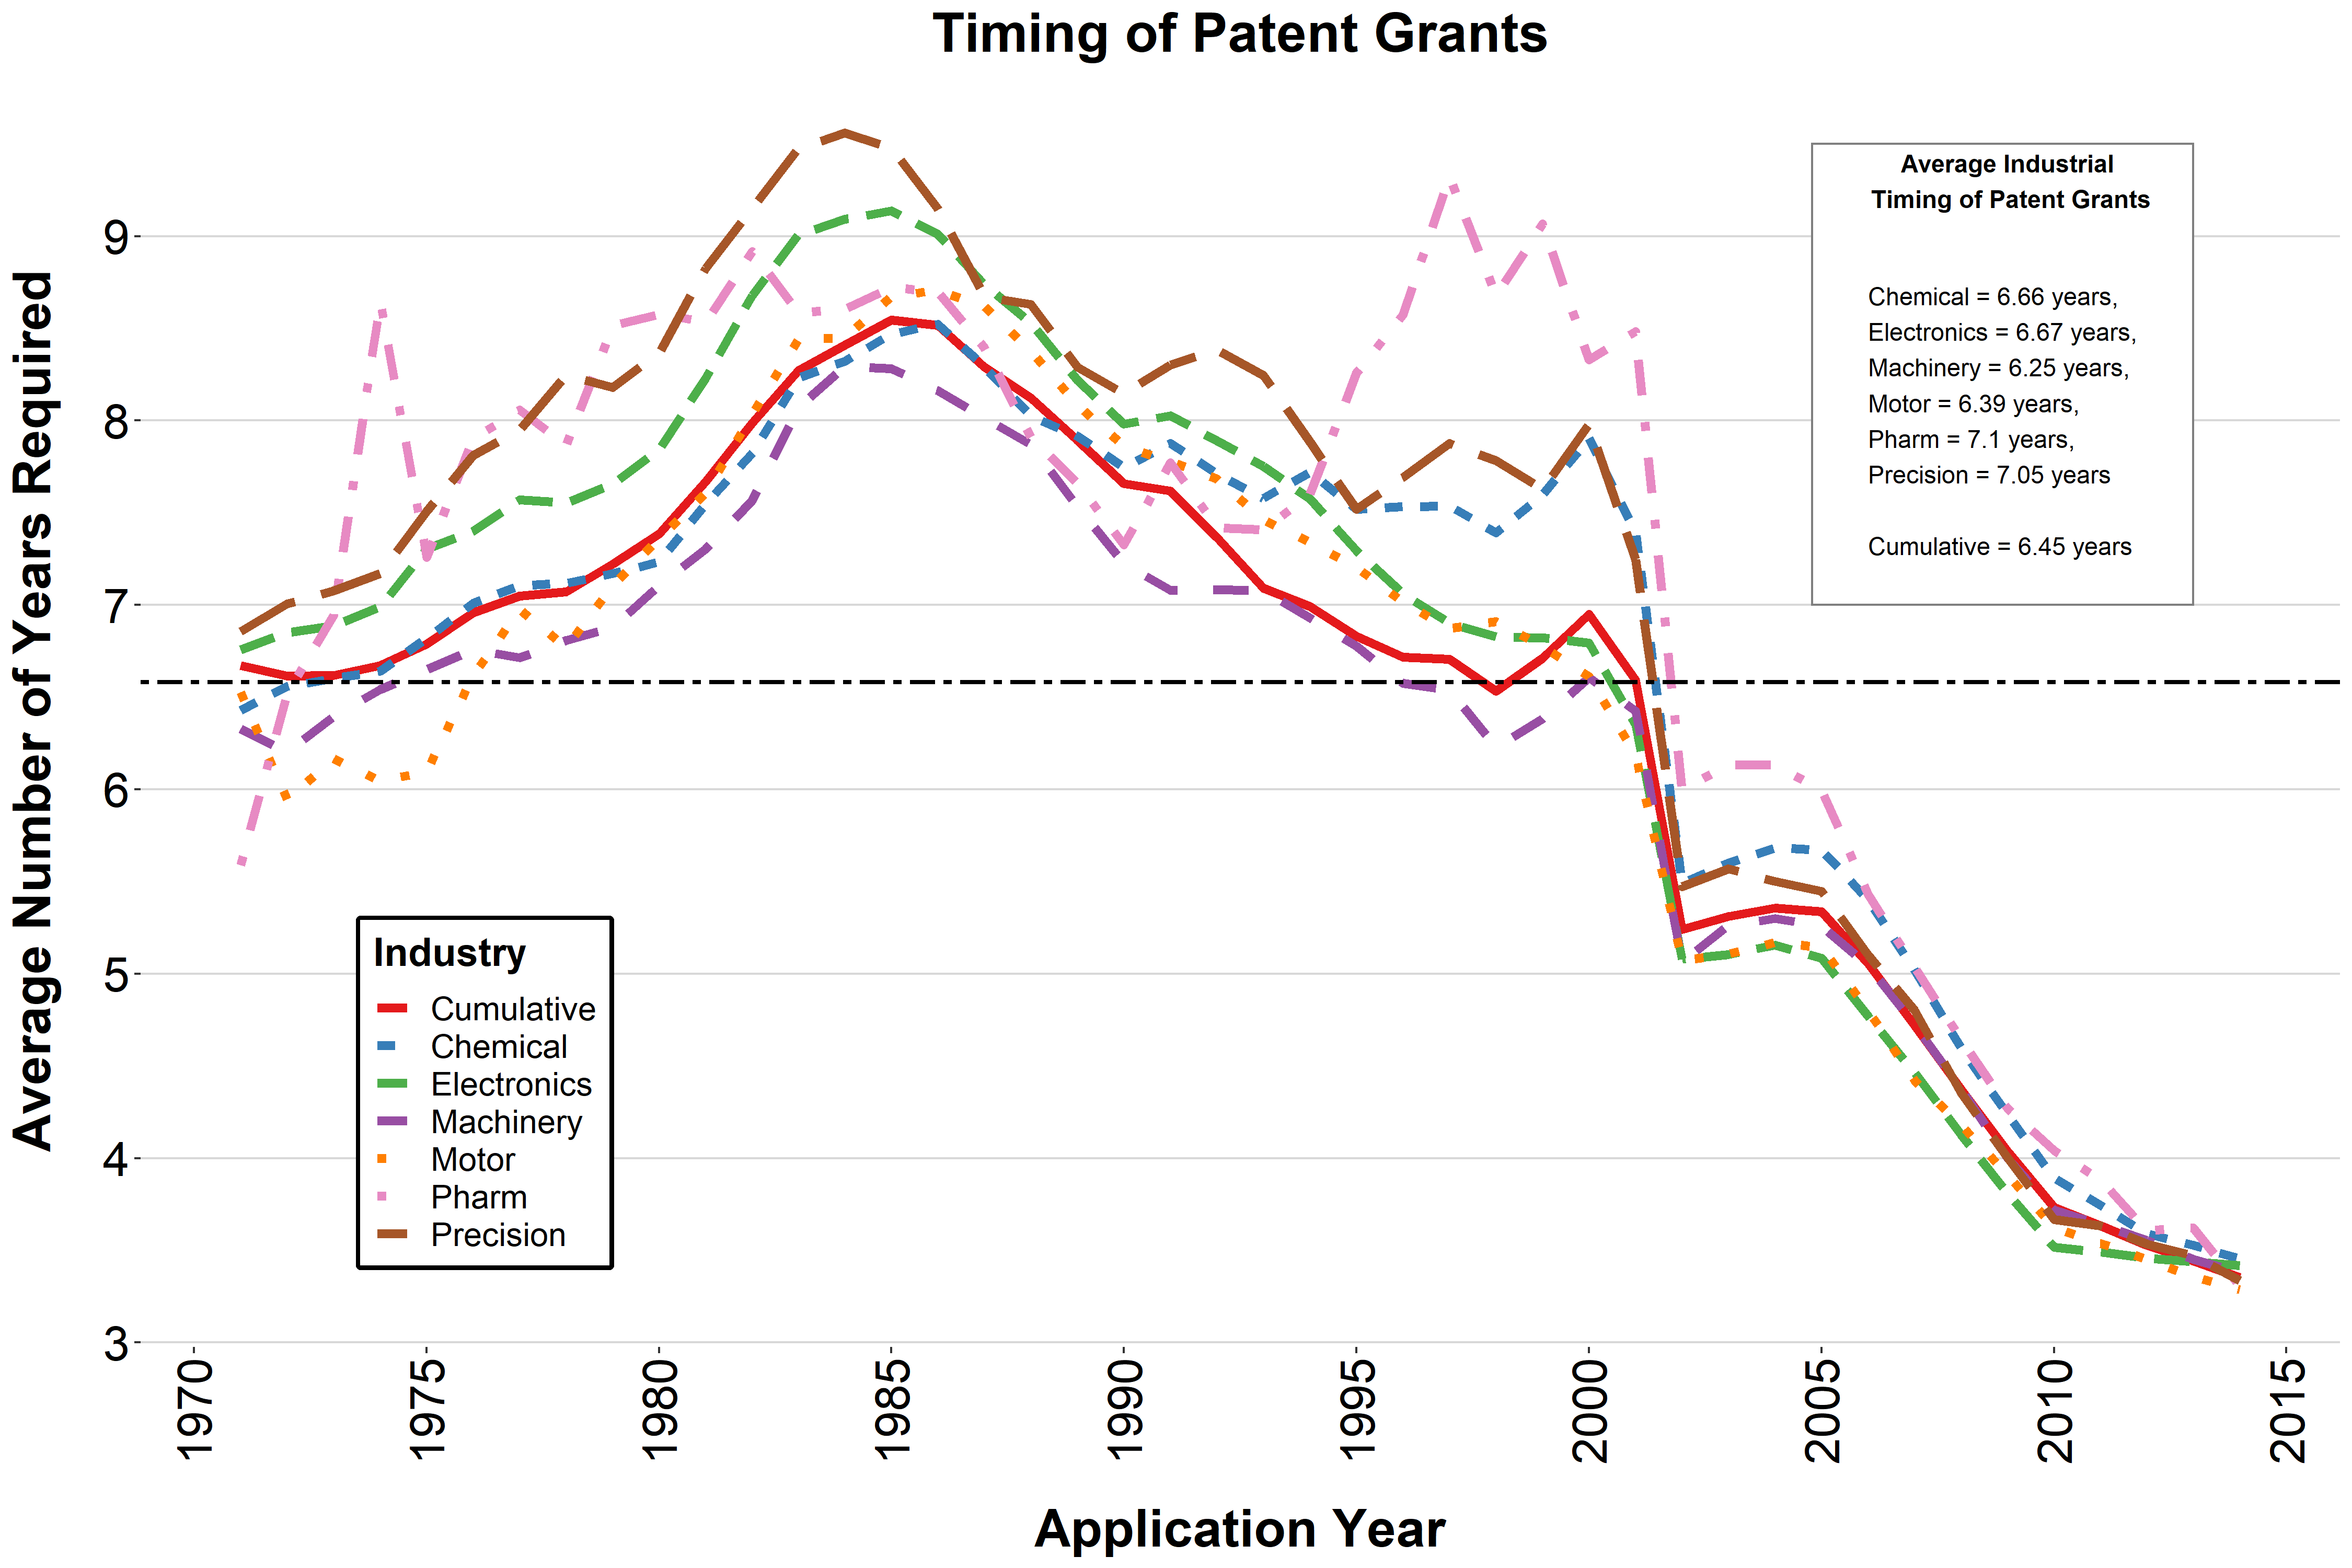 Timing for turning patent applications into grants